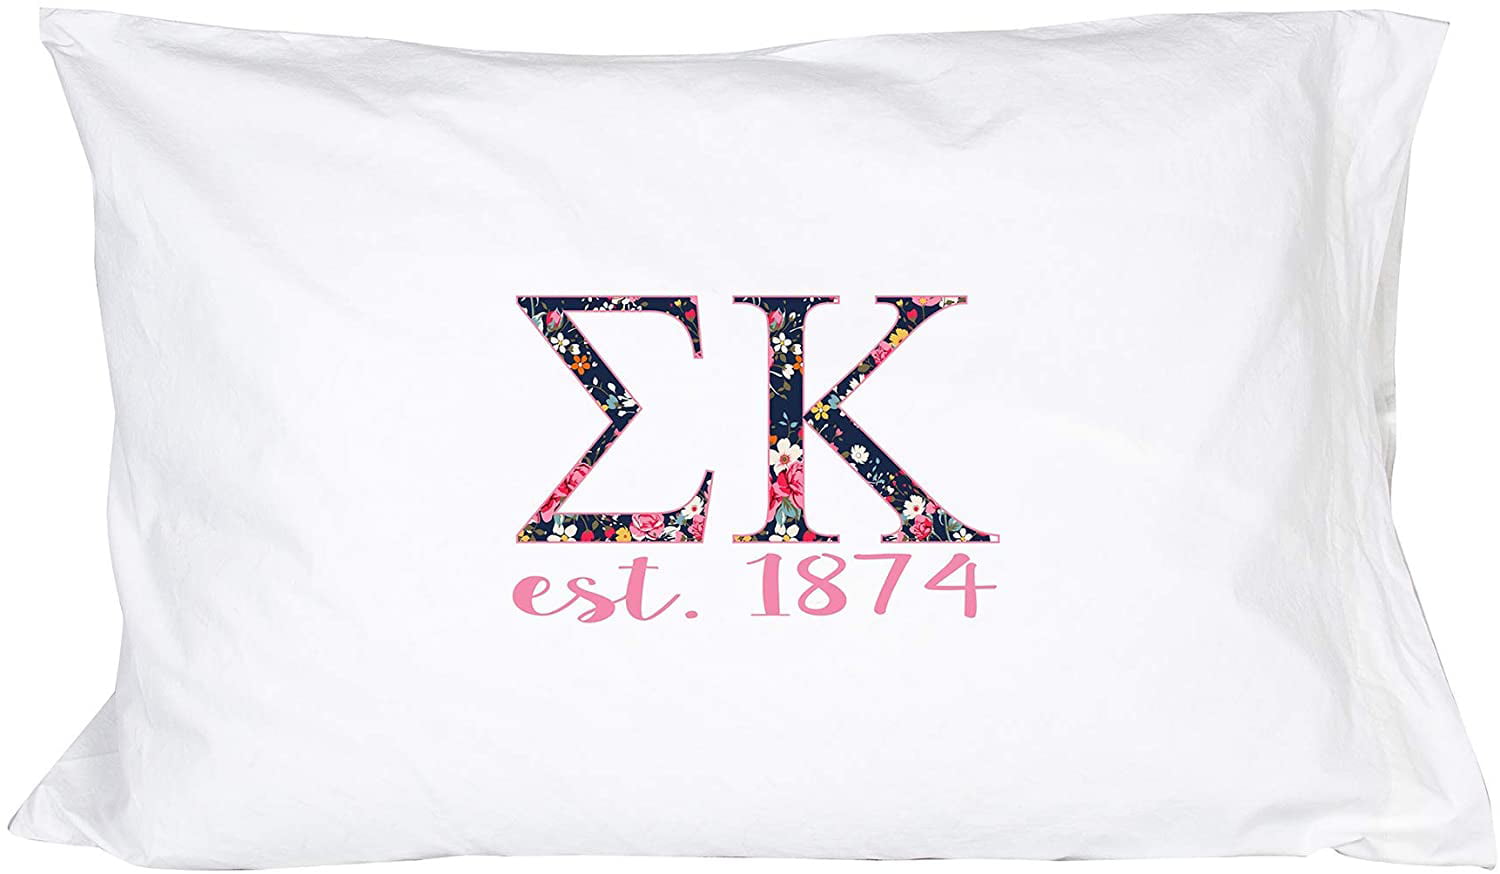 Desert Cactus Kappa Kappa Gamma Sorority Floral Letters with Founding Year Pillowcase 300 Thread Count 100% Cotton KKG 